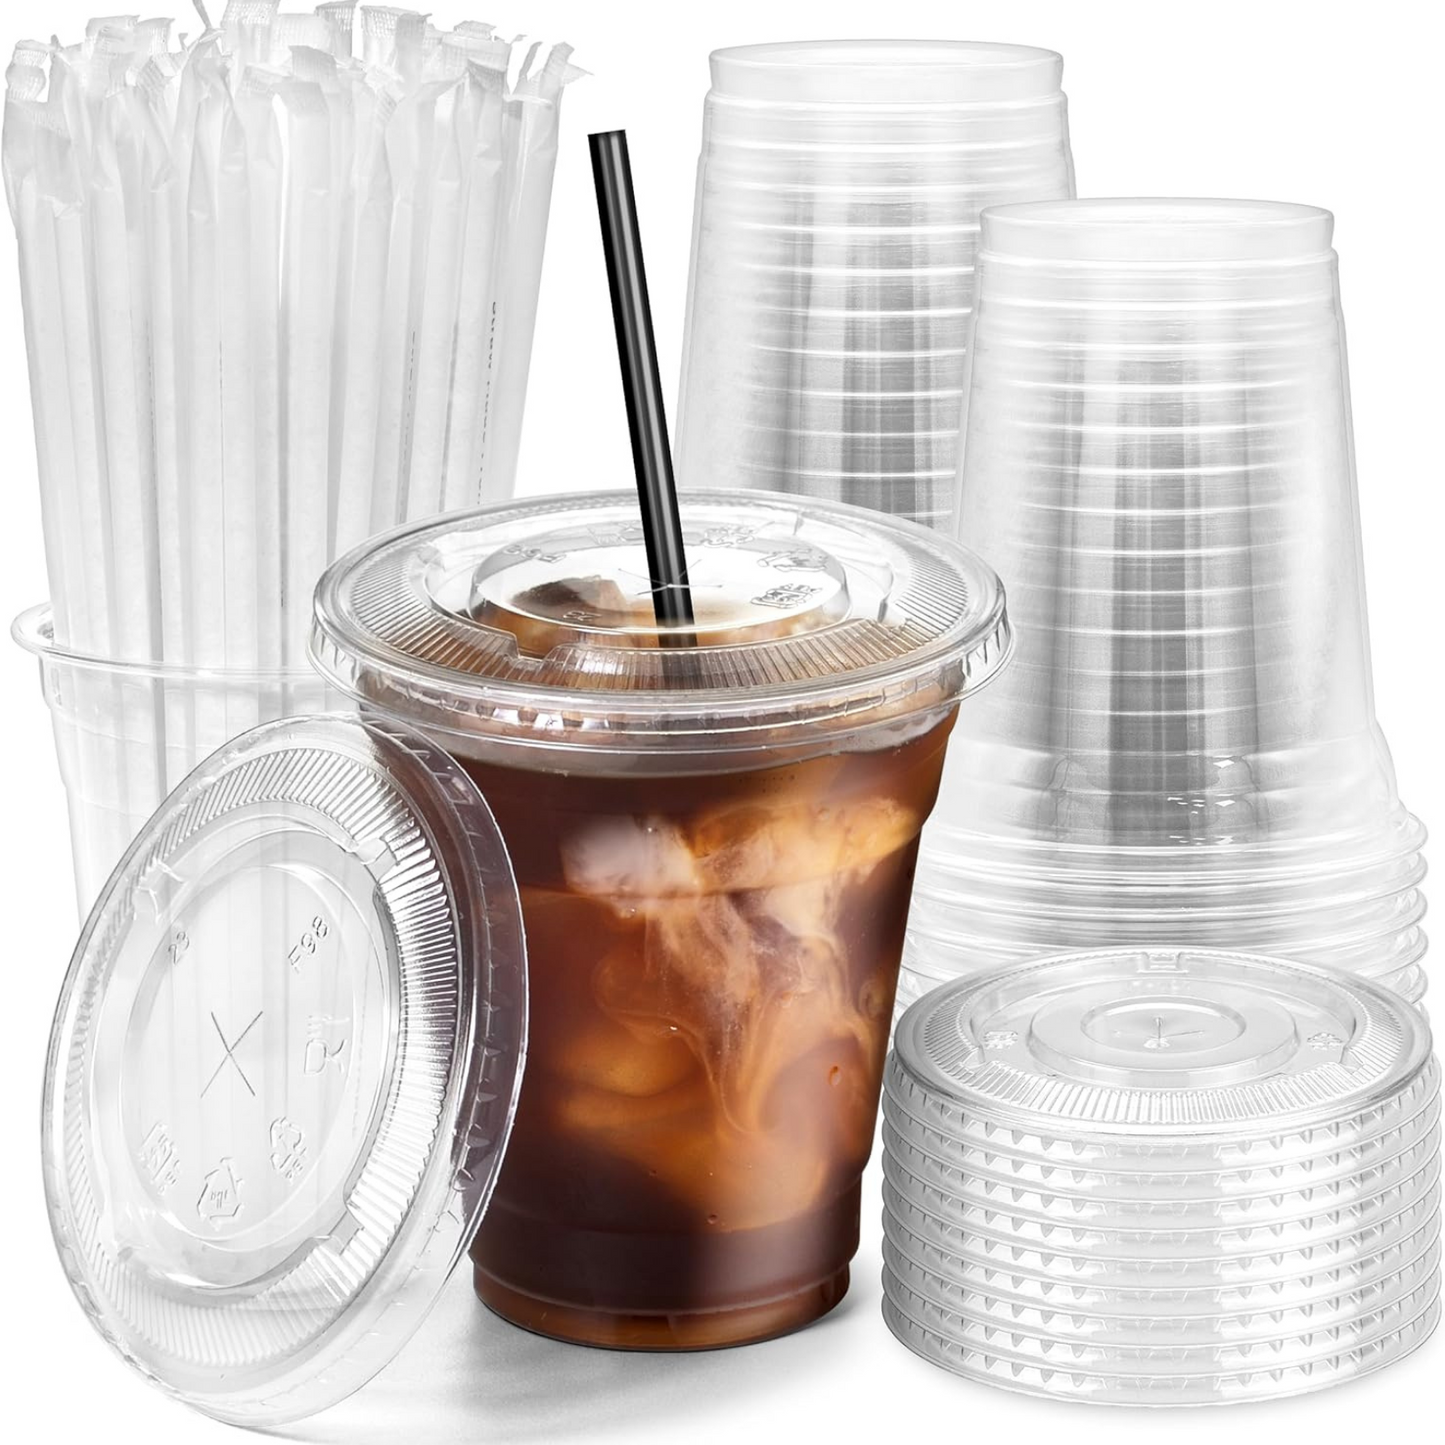 12oz Plastic Clear PET Cups With Flat Lid & Straw, for All Kinds of Beverages Smoothie Cups VeZee Cups/Lids/Straws 100 Pack 